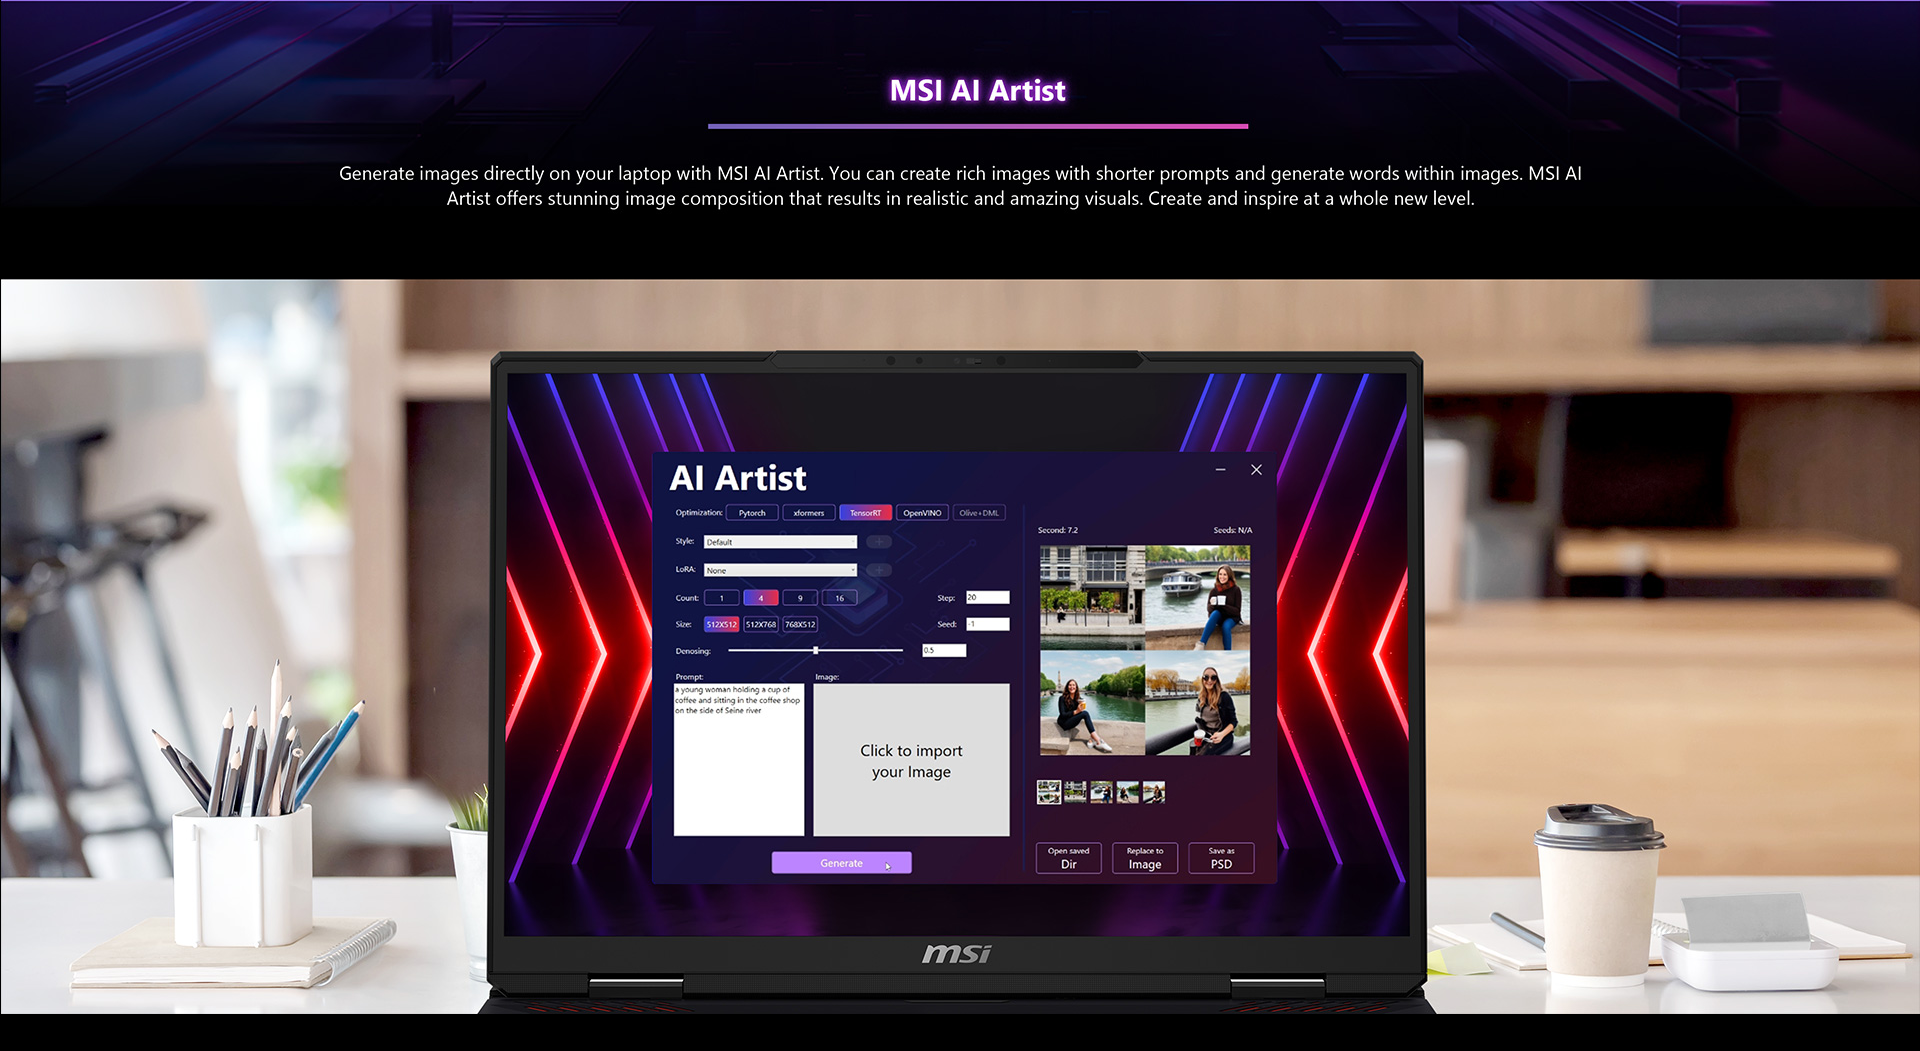 Generate images directly on your laptop with MSI AI Artist. You can create rich images with shorter prompts and generate words within images. MSI AI Artist offers stunning image composition that results in realistic and amazing visuals. Create and inspire at a whole new level.